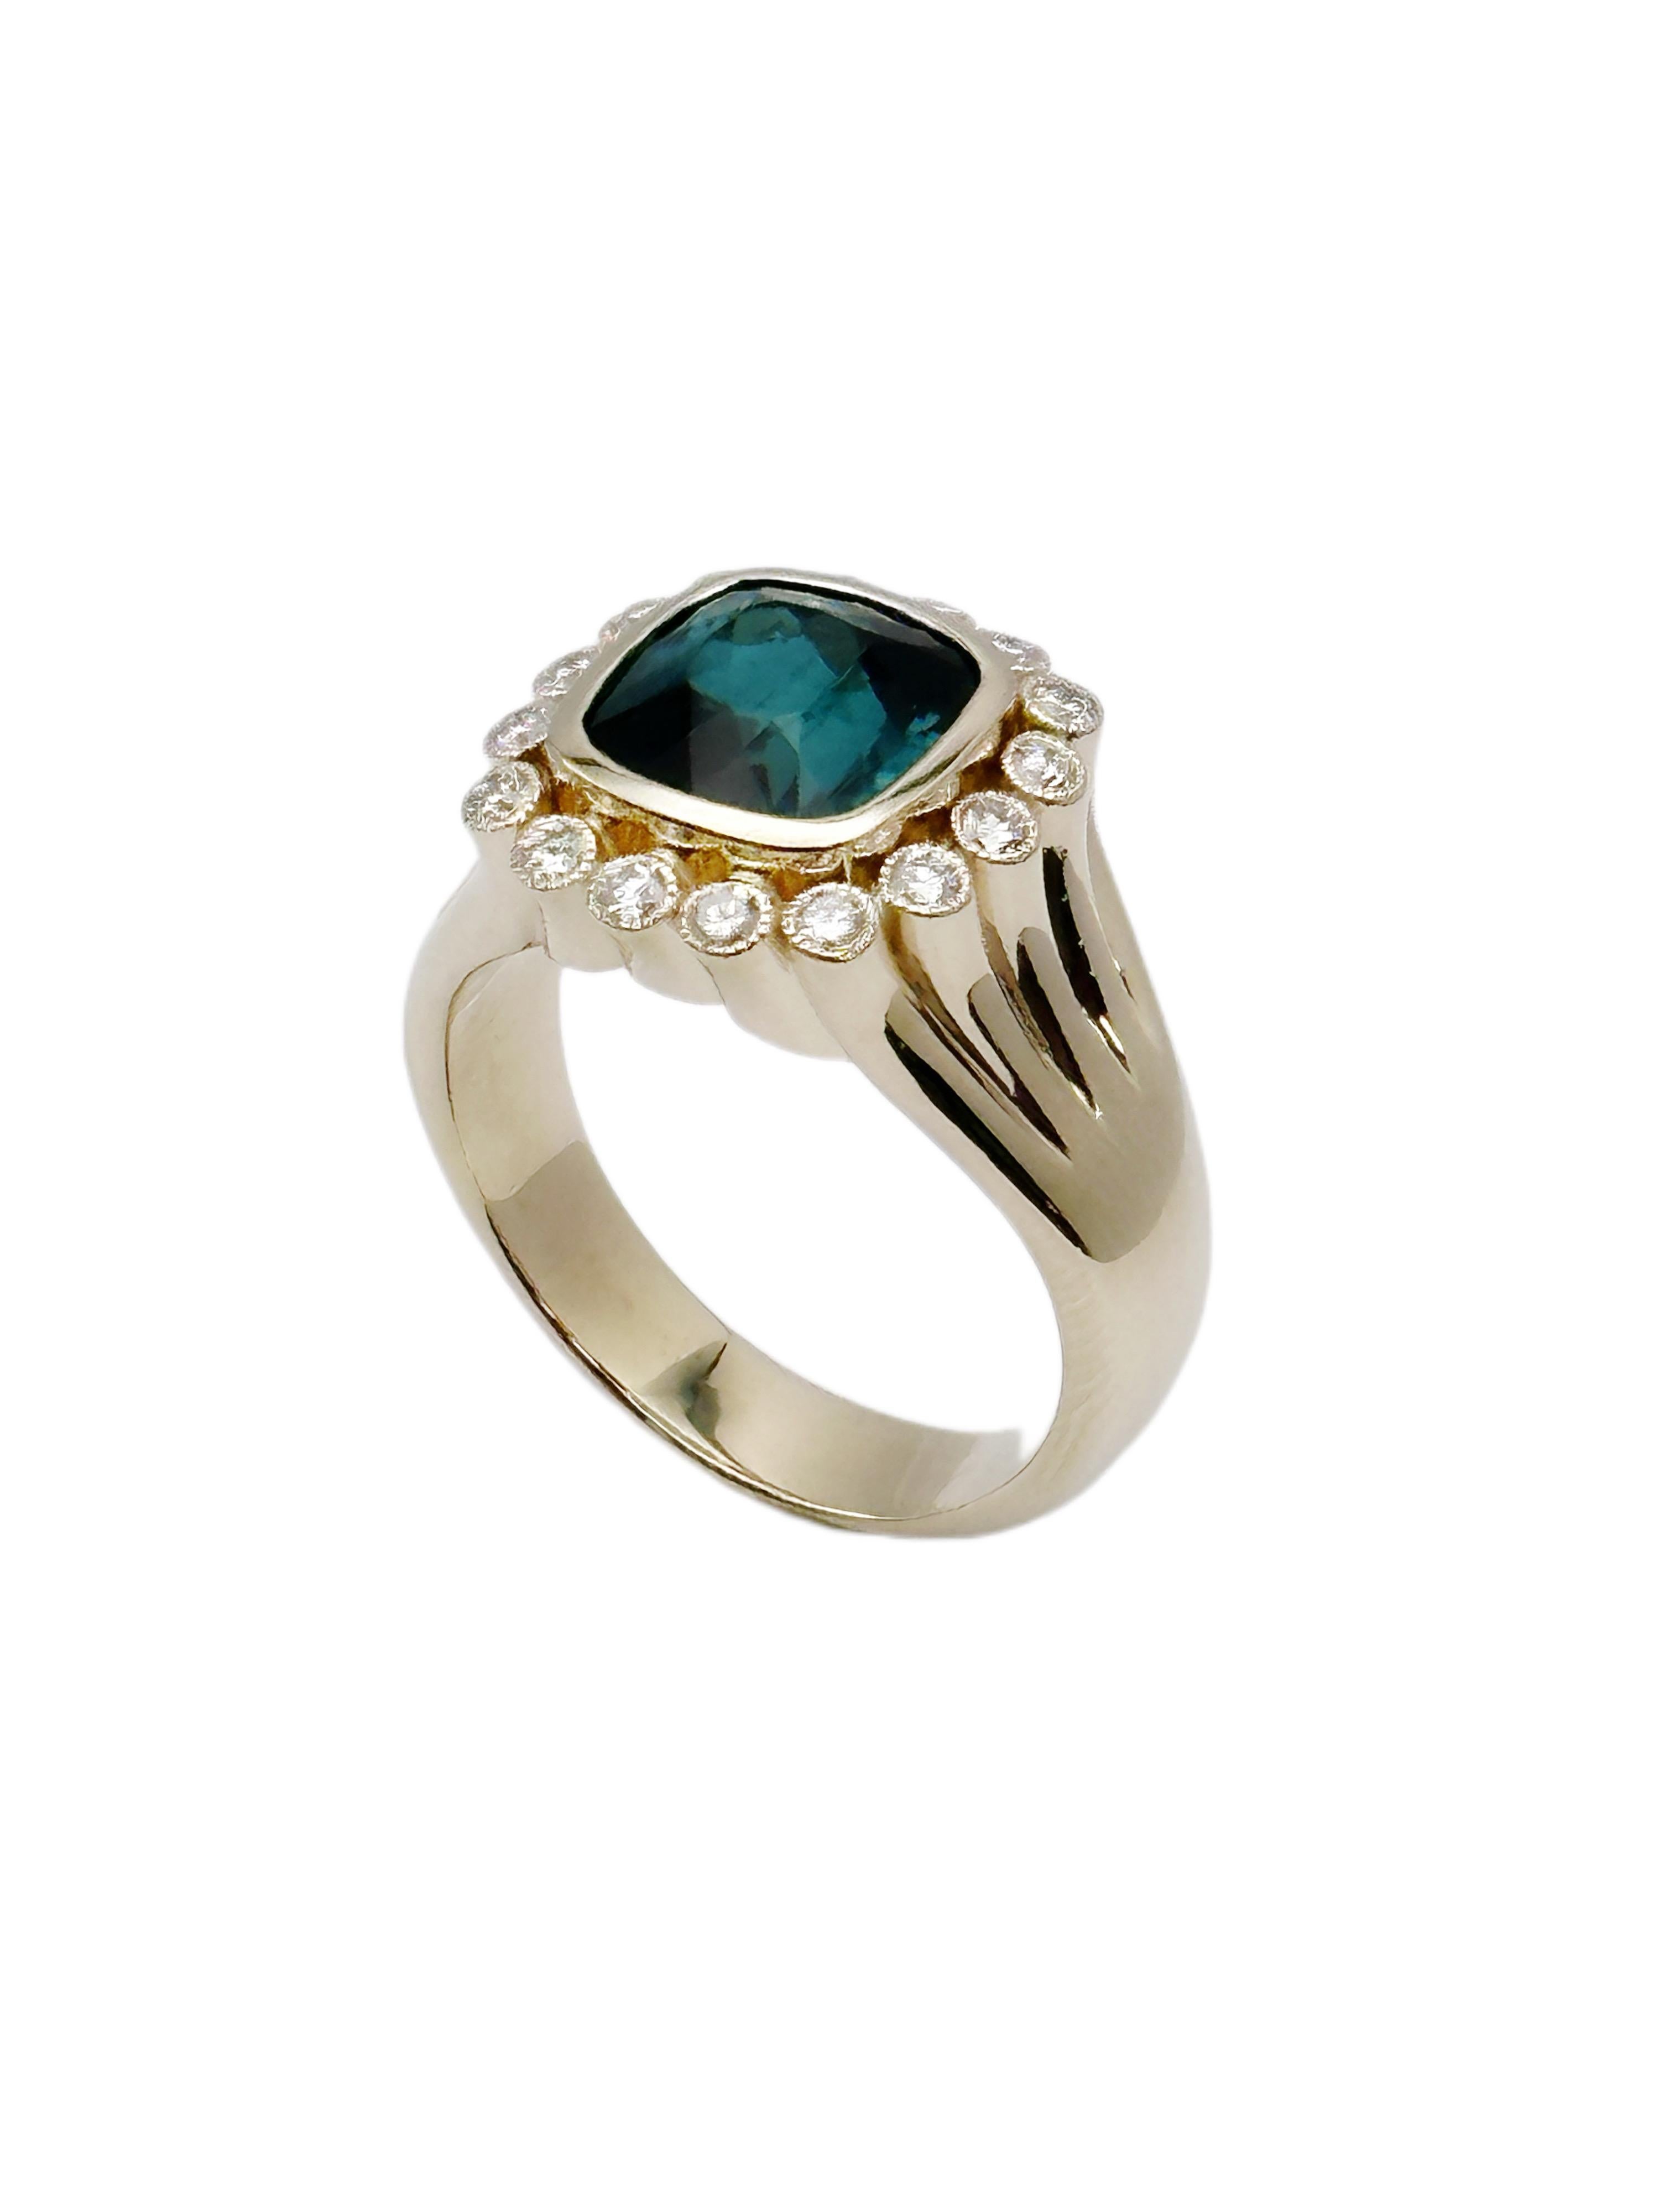 For Sale:  18K Yellow Gold Blue Topaz Cushion Cut Signet Ring with Diamond Accents 2